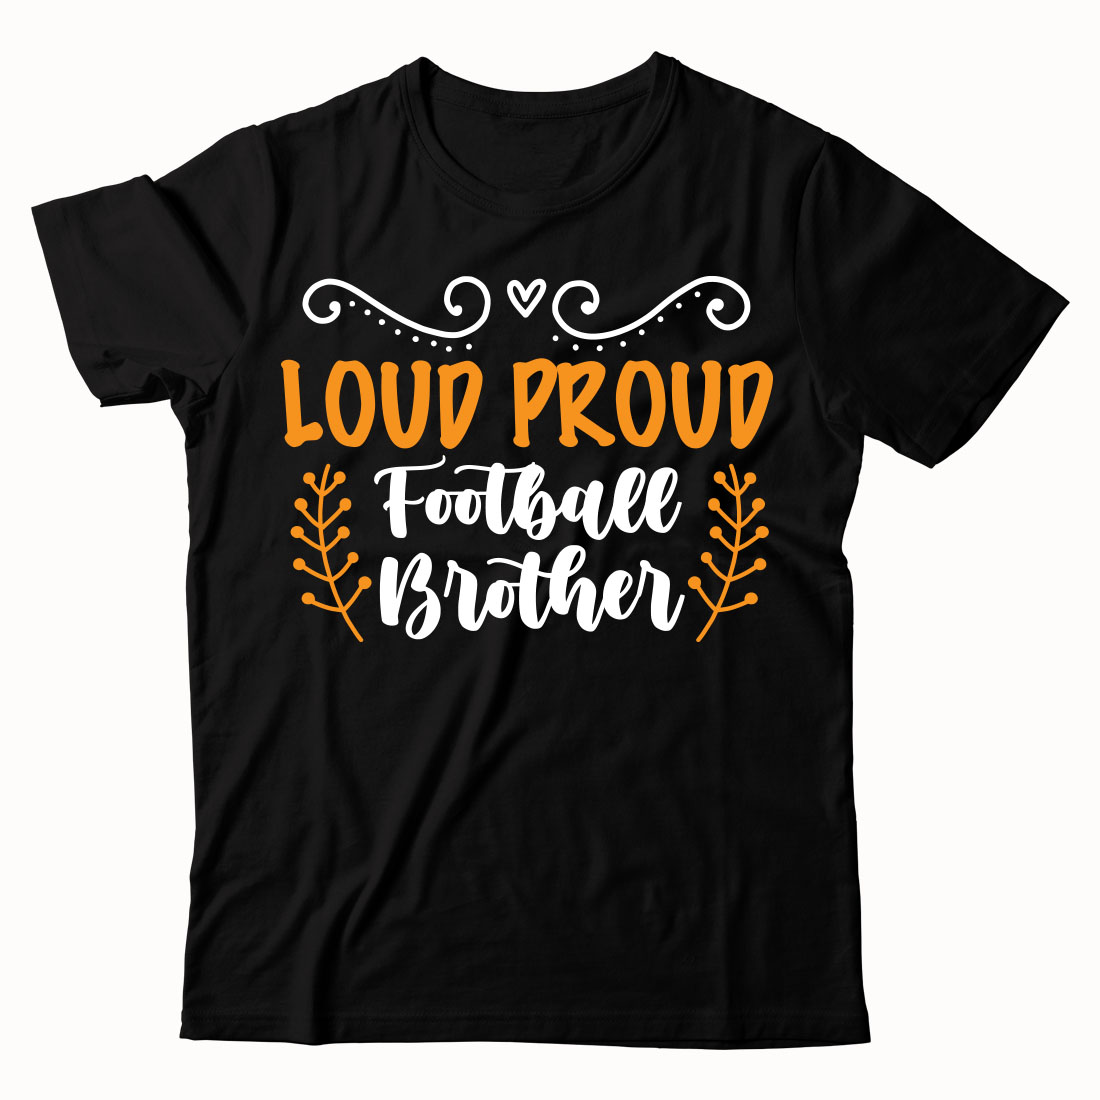 Black t - shirt that says loud proud football brother.